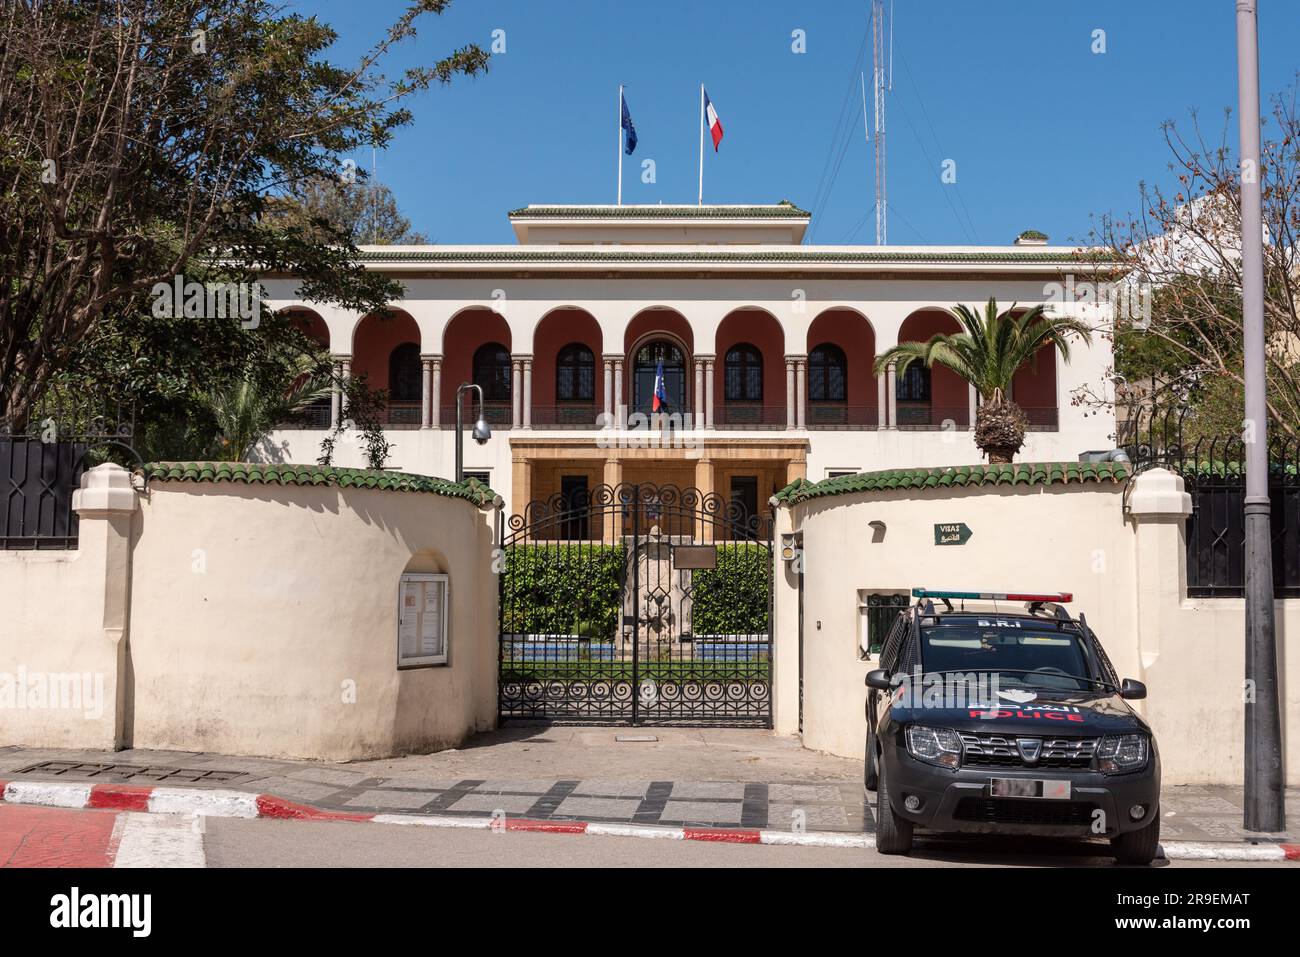 The French consulate in the city center of Tangier, based in an ol colonial building from the Franch period, Morocco Stock Photo